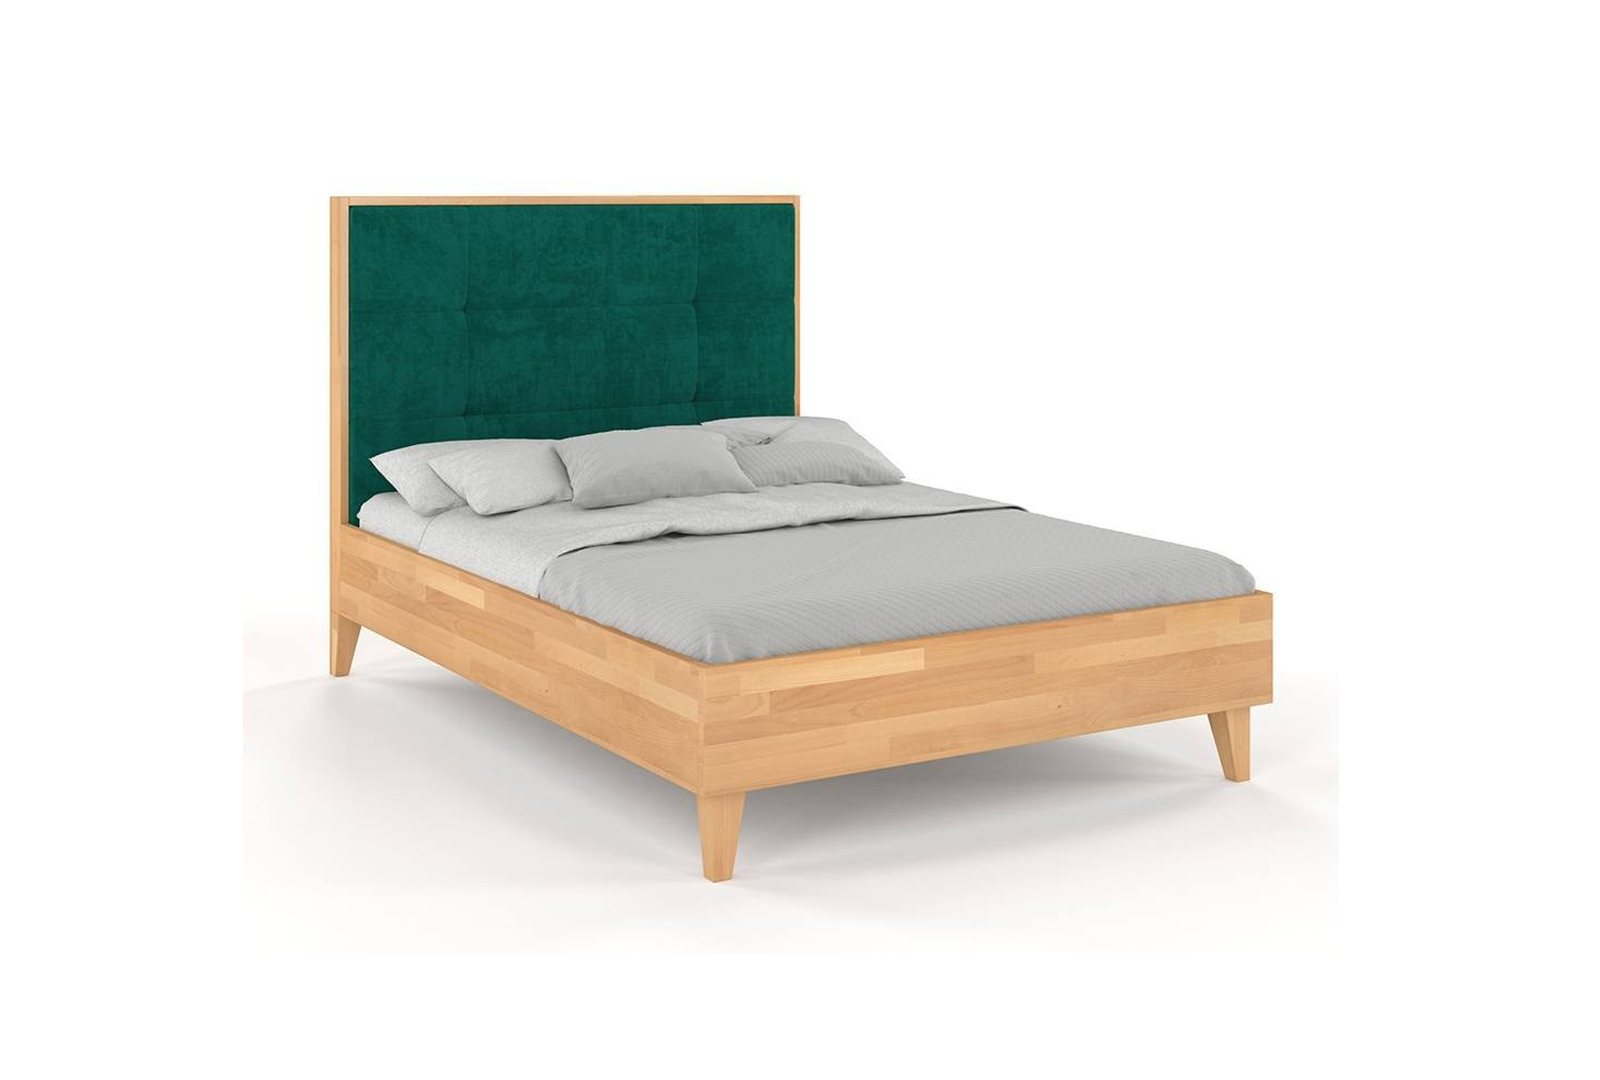 VISBY FRIDA WOODEN BEECH BED WITH A HIGH HEADBOARD 2